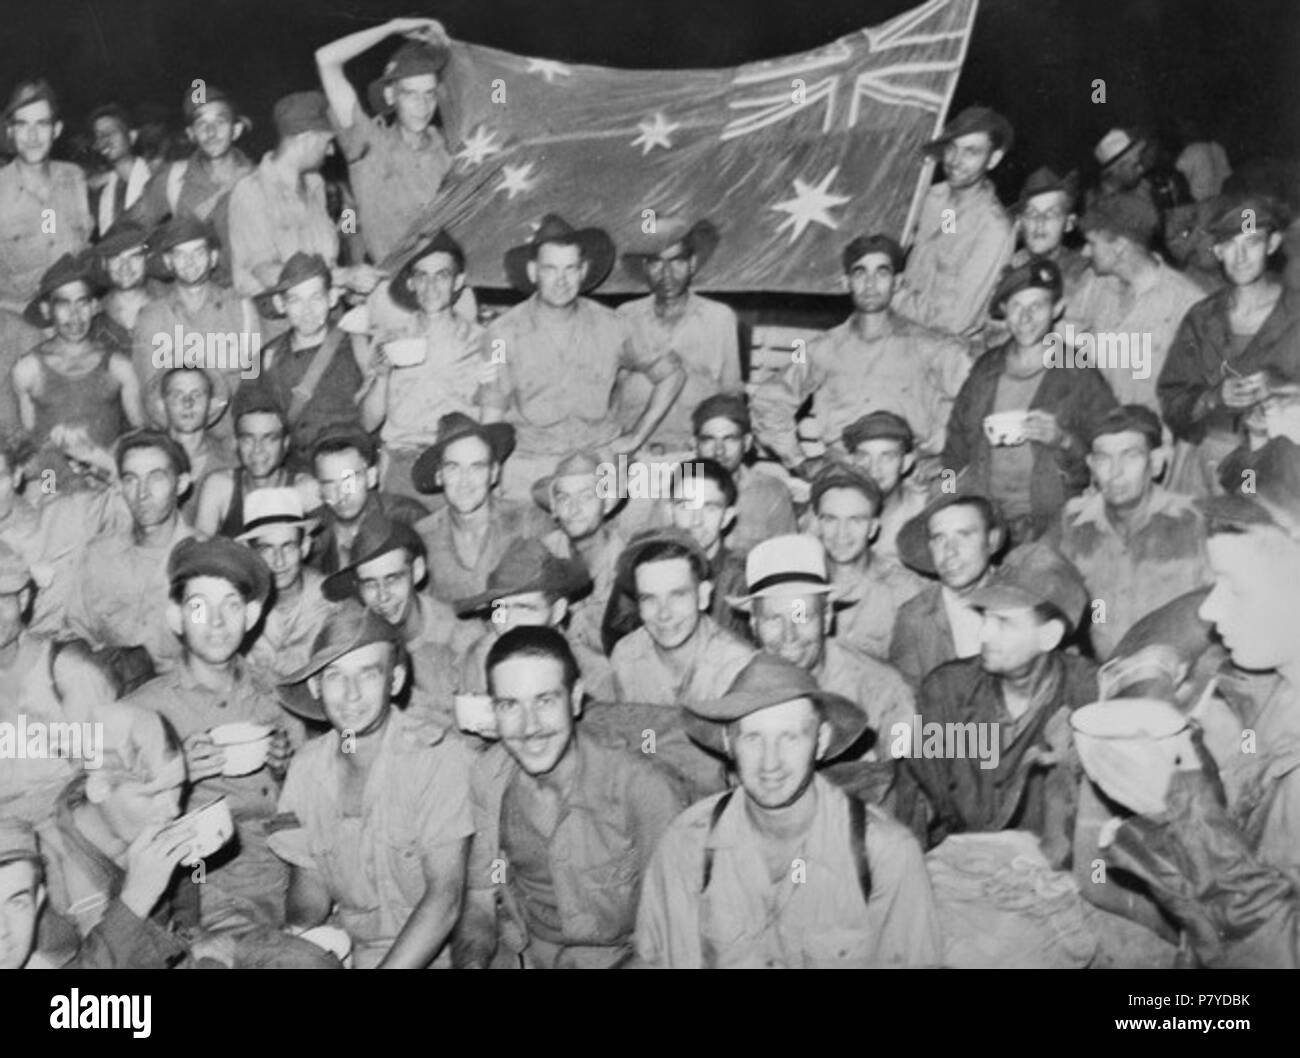 English: According to the Australian War Memorial the caption to this photograph reads: 'Yokohama, Japan. September 1945. These Australian men smiling and displaying the Australian flag they are so proud of were amongst 231 prisoners of war (POWs) released and brought into Yokohama in the middle of the night. The lateness of the hour did not stop them from demonstrating their joy at release. The flag was made and sown by hand from pieces of coloured parachutes used to drop supplies to them while still in camp. All these men were members of 8th Division. They were captured in Singapore and Mala Stock Photo